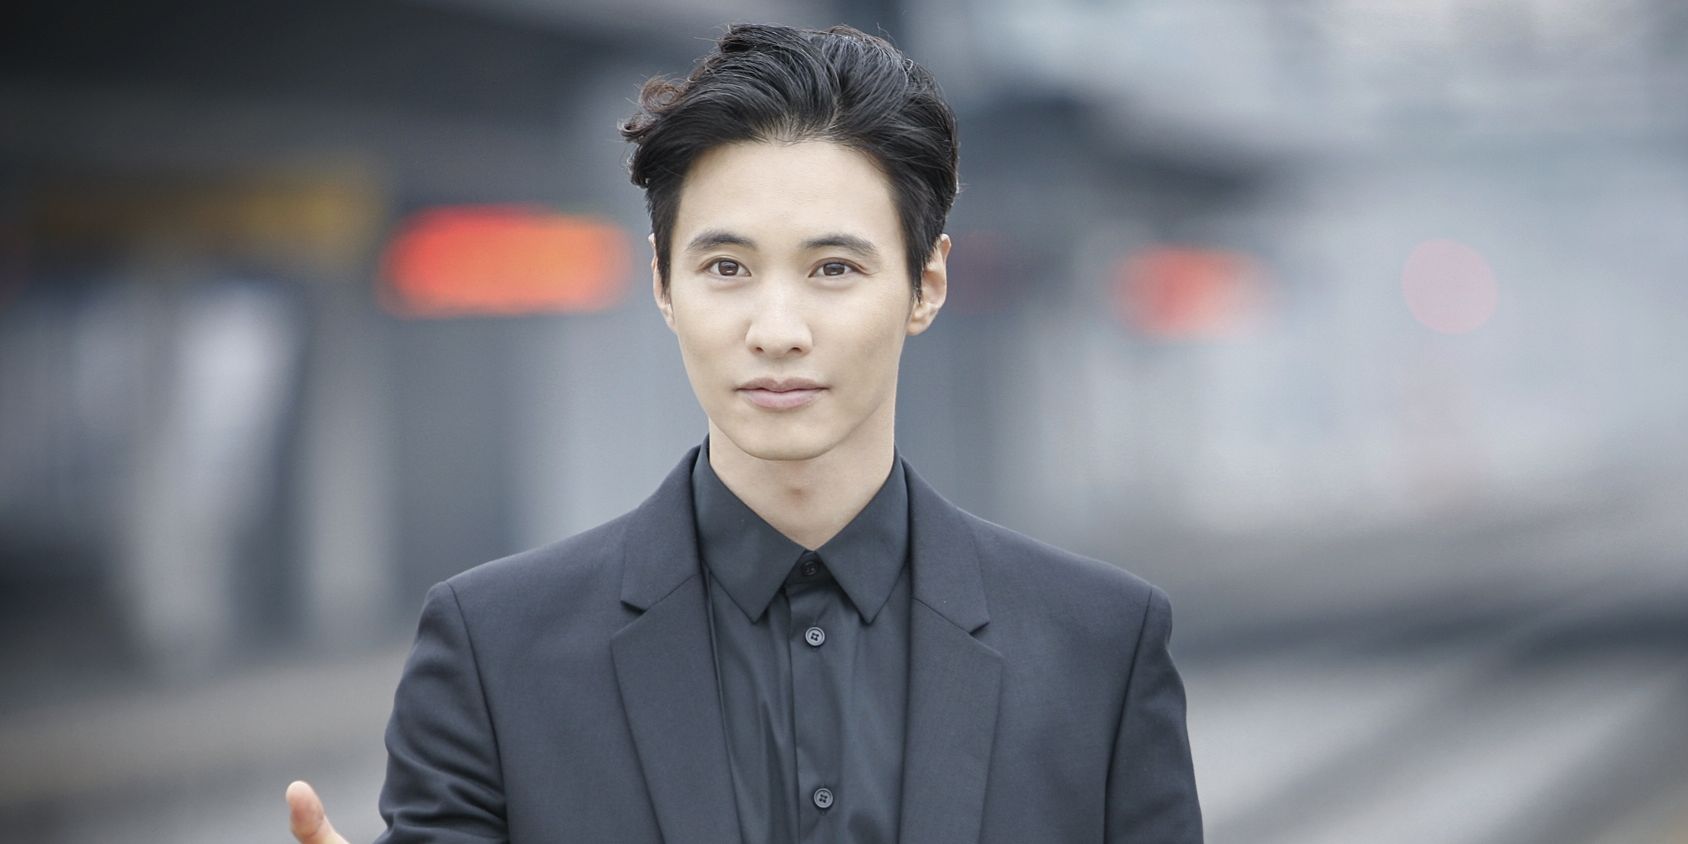 Get to Know More About 'Autumn in My Heart' Actor Won Bin: Profile, Wife, Wedding Photo, and Much More!